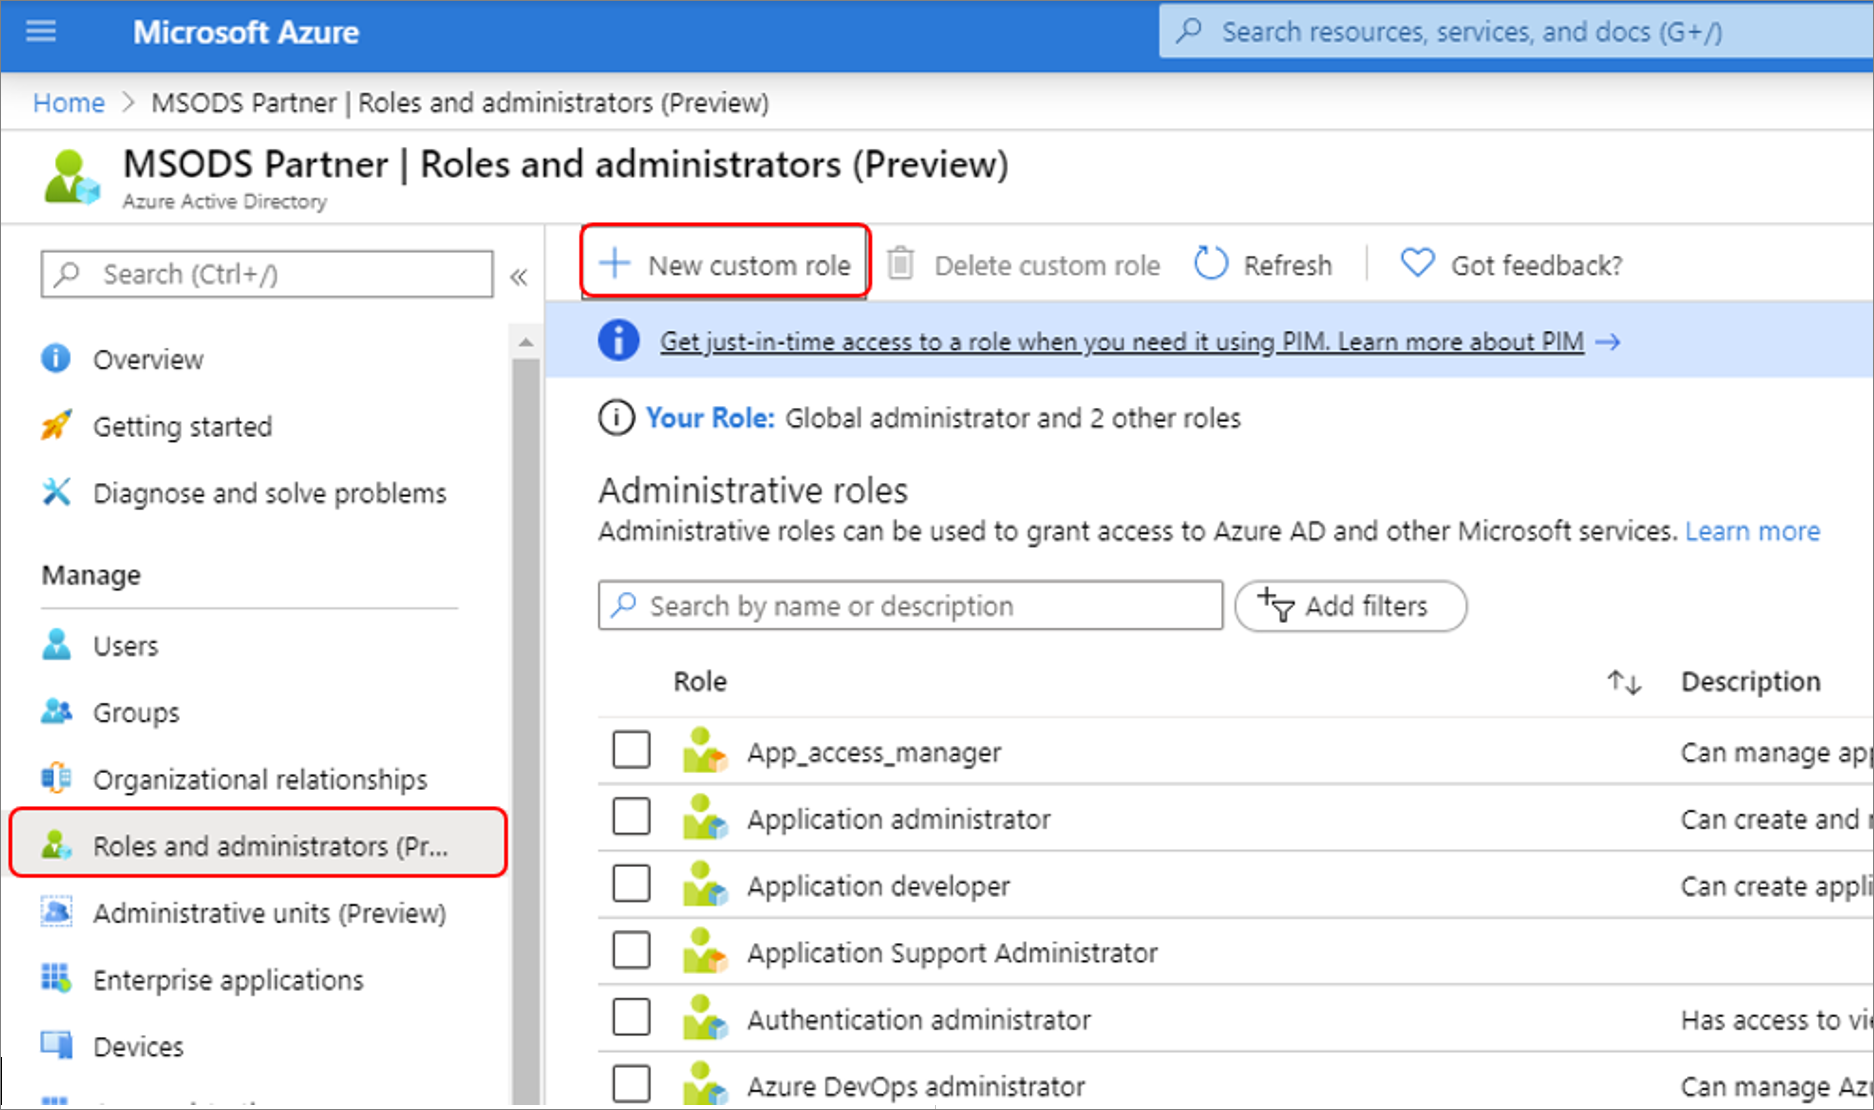 Add a new custom role from the roles list in Azure AD